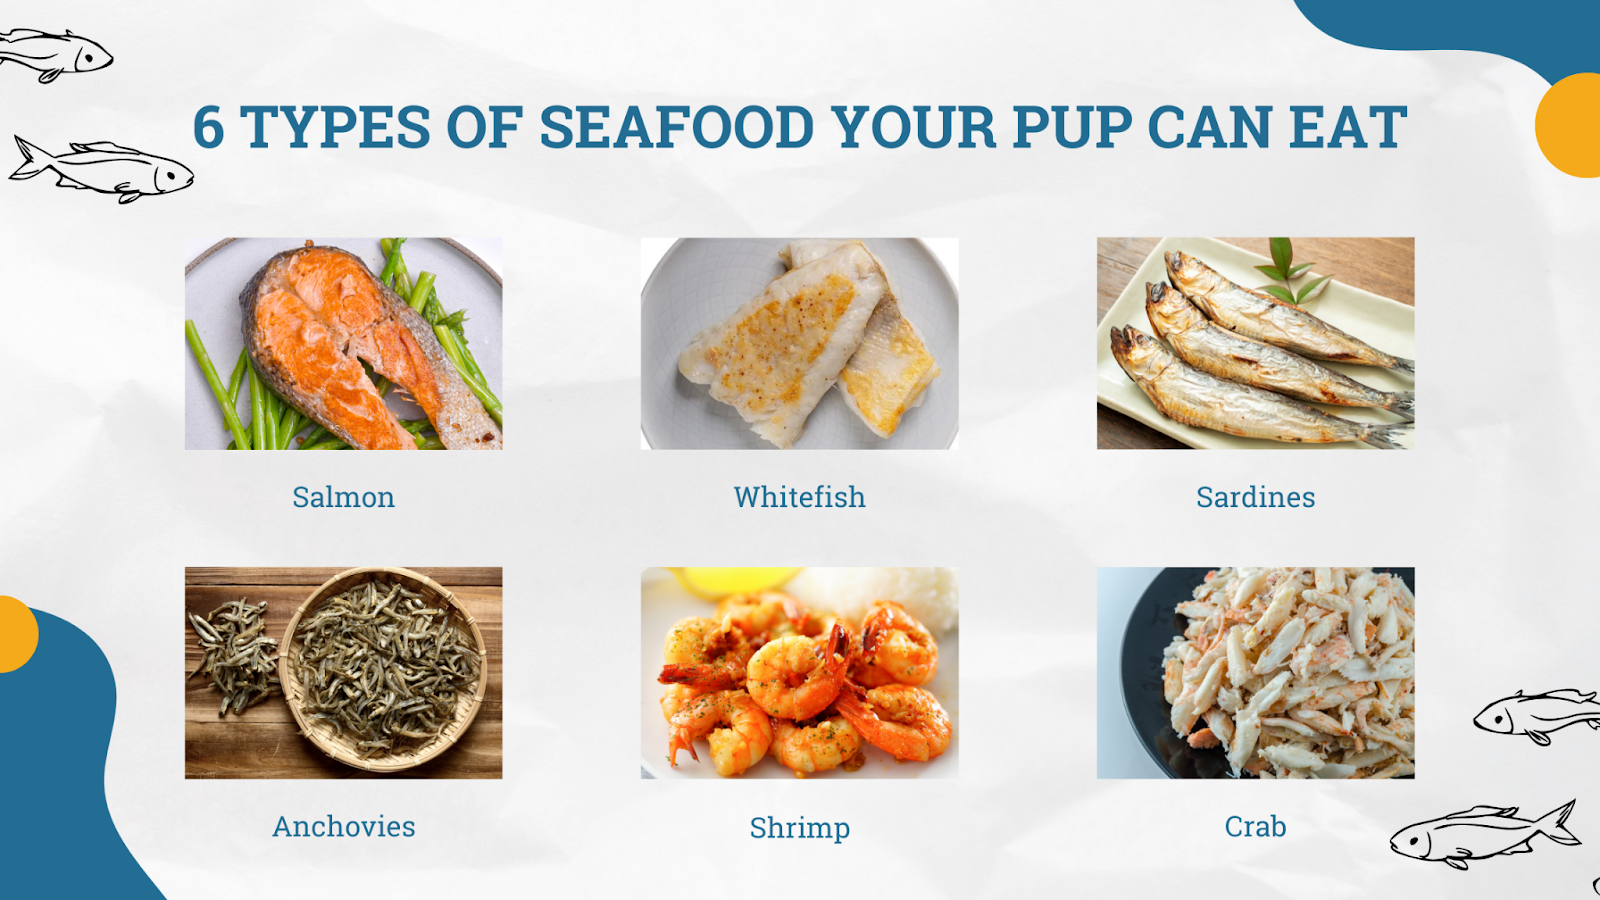 6 types of seafood your pup can eat